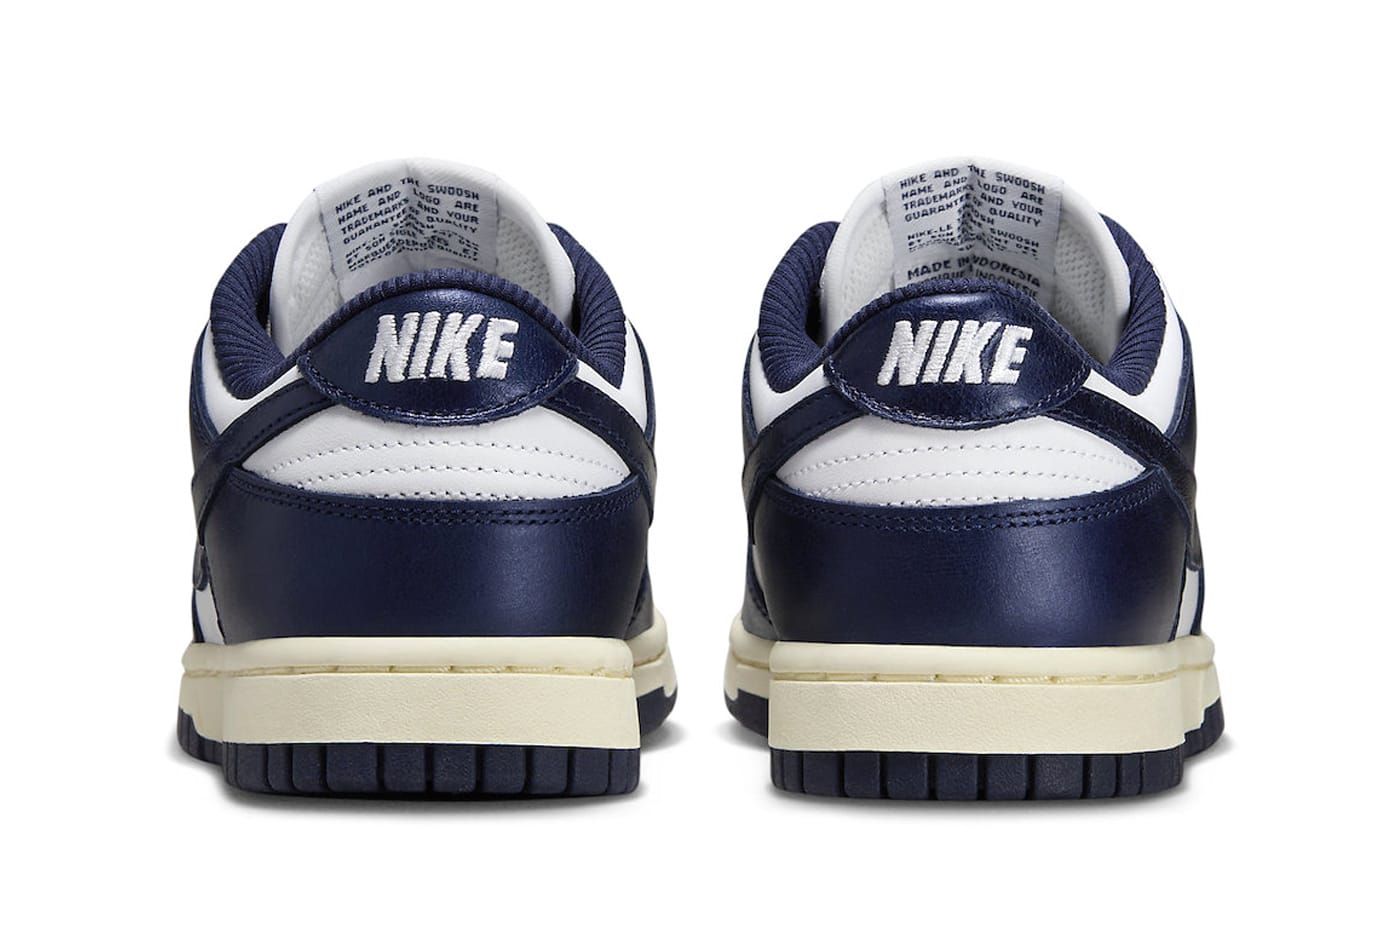 Nike Dunk Low Surfaces in 